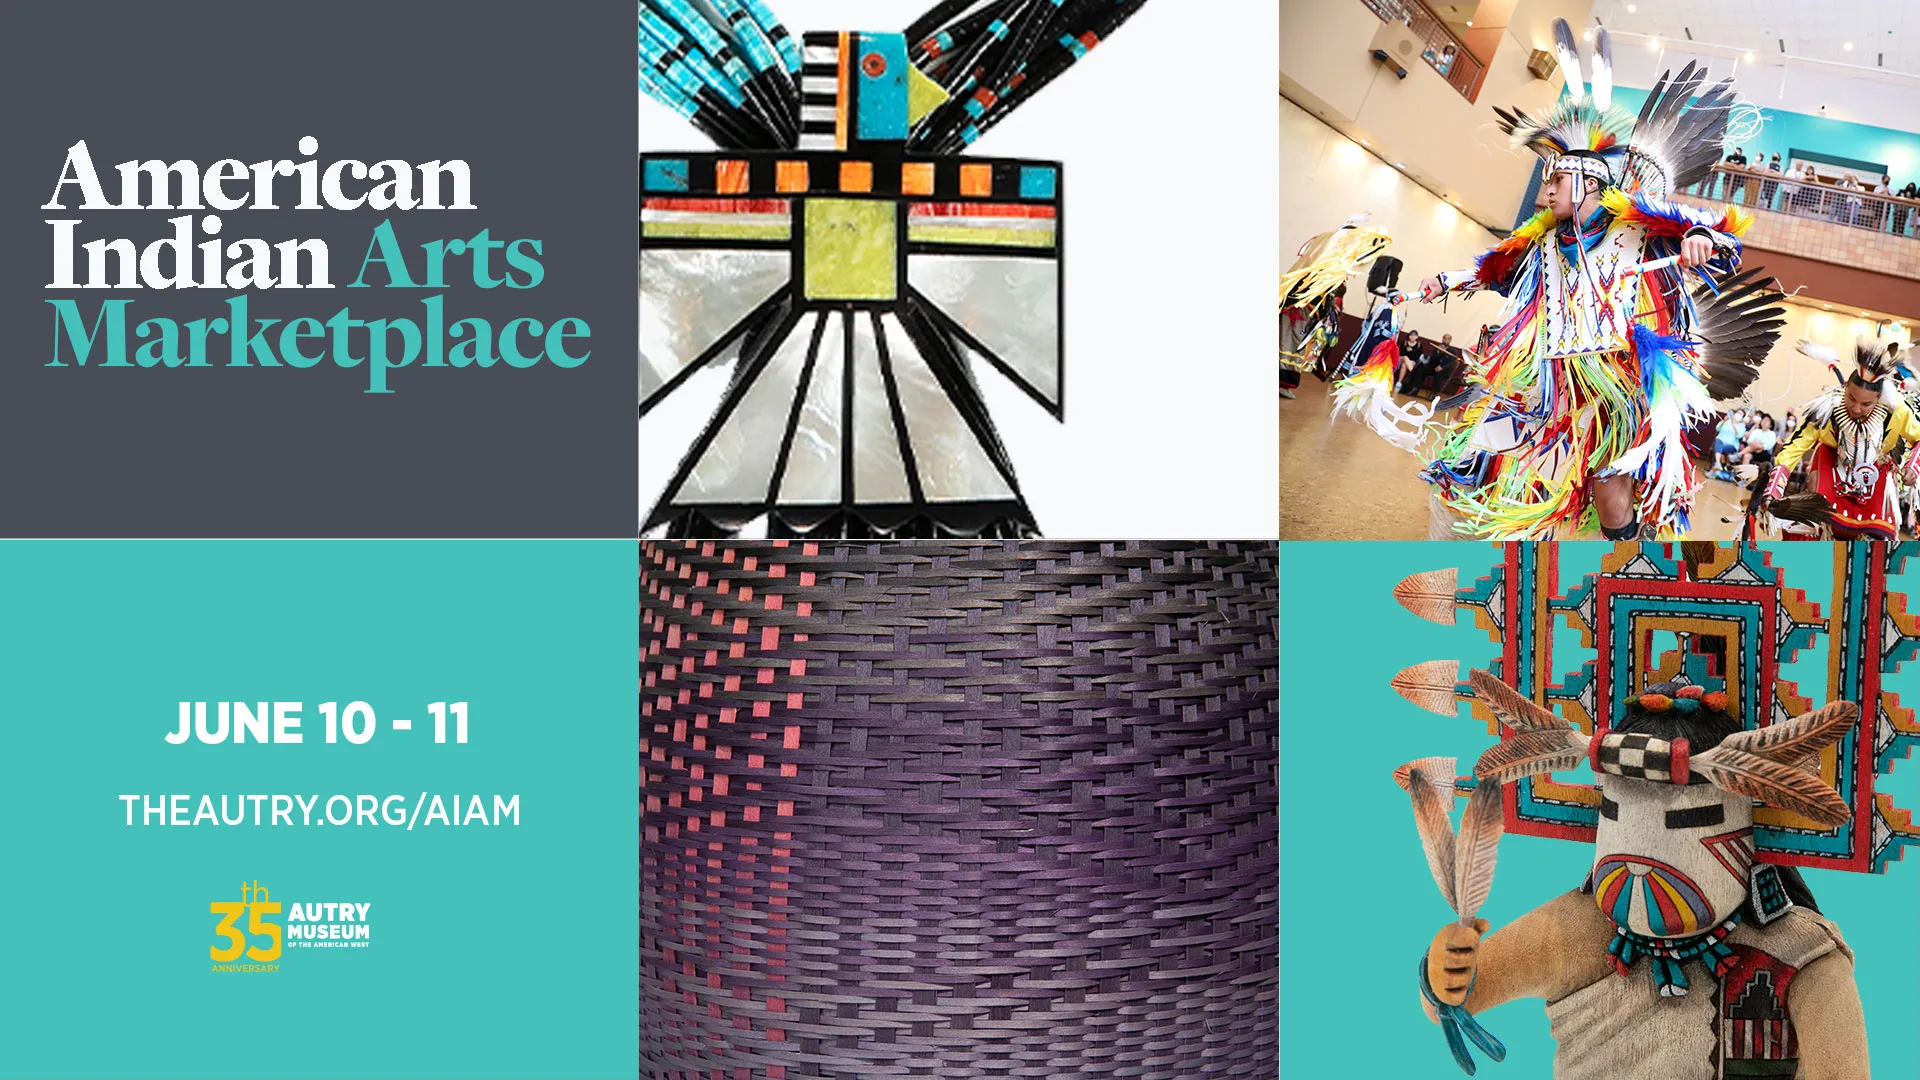 Rectangular image with six squares, two featuring the American Indian Arts Marketplace name, dates, and location, and four featuring images of artworks and partners from the Marketplace.